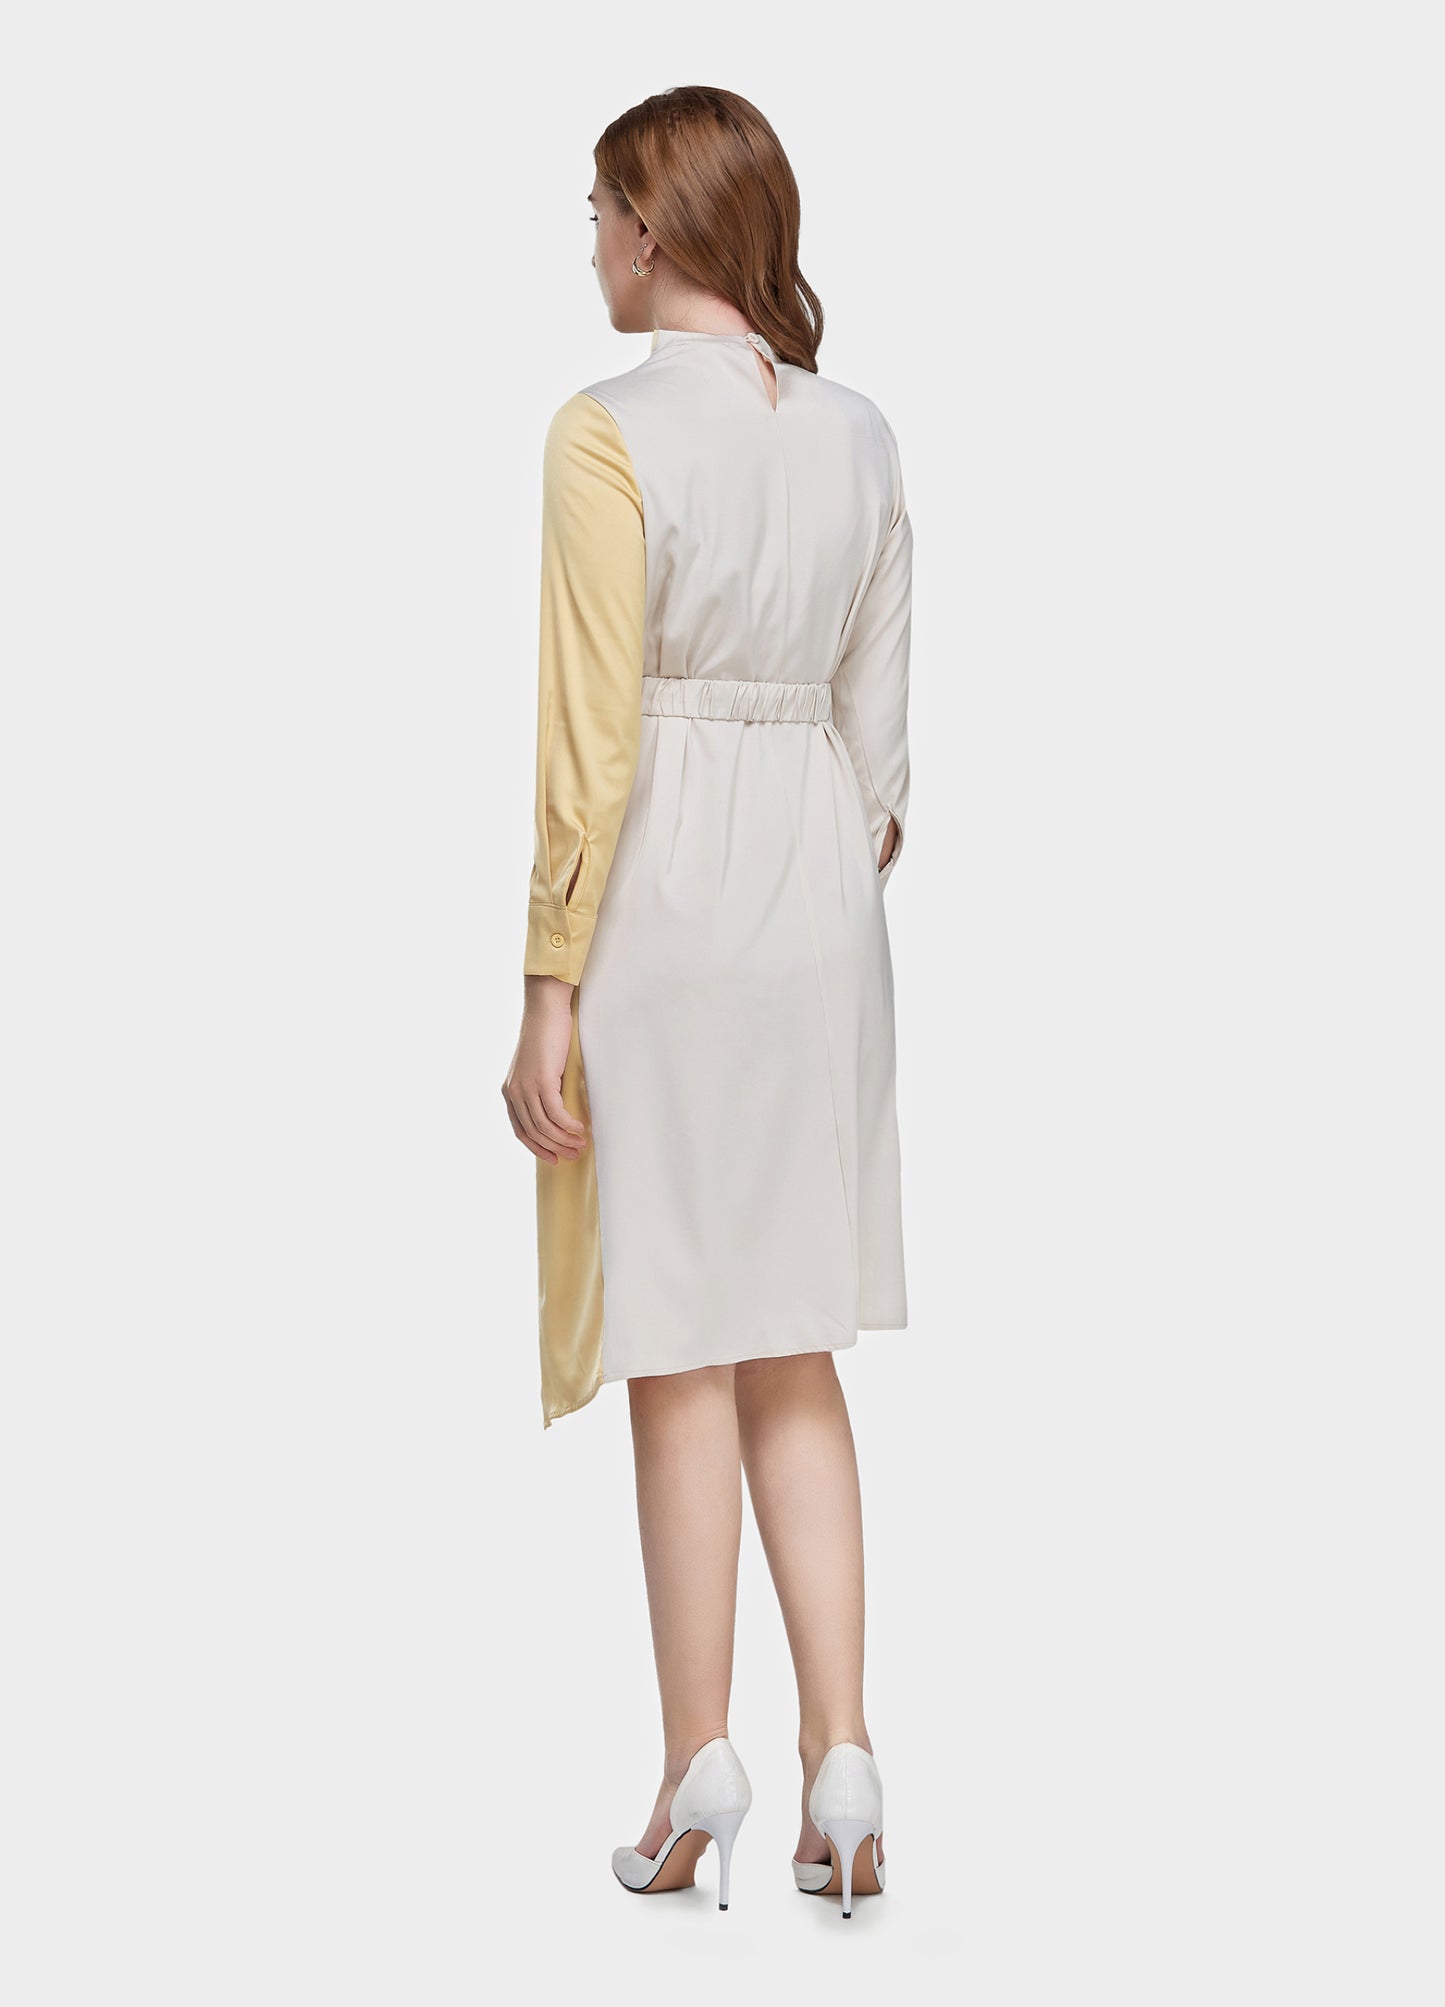 Women's Belted Colorblock High-Neck Long Sleeve Dress-Apricot & Yellow back view